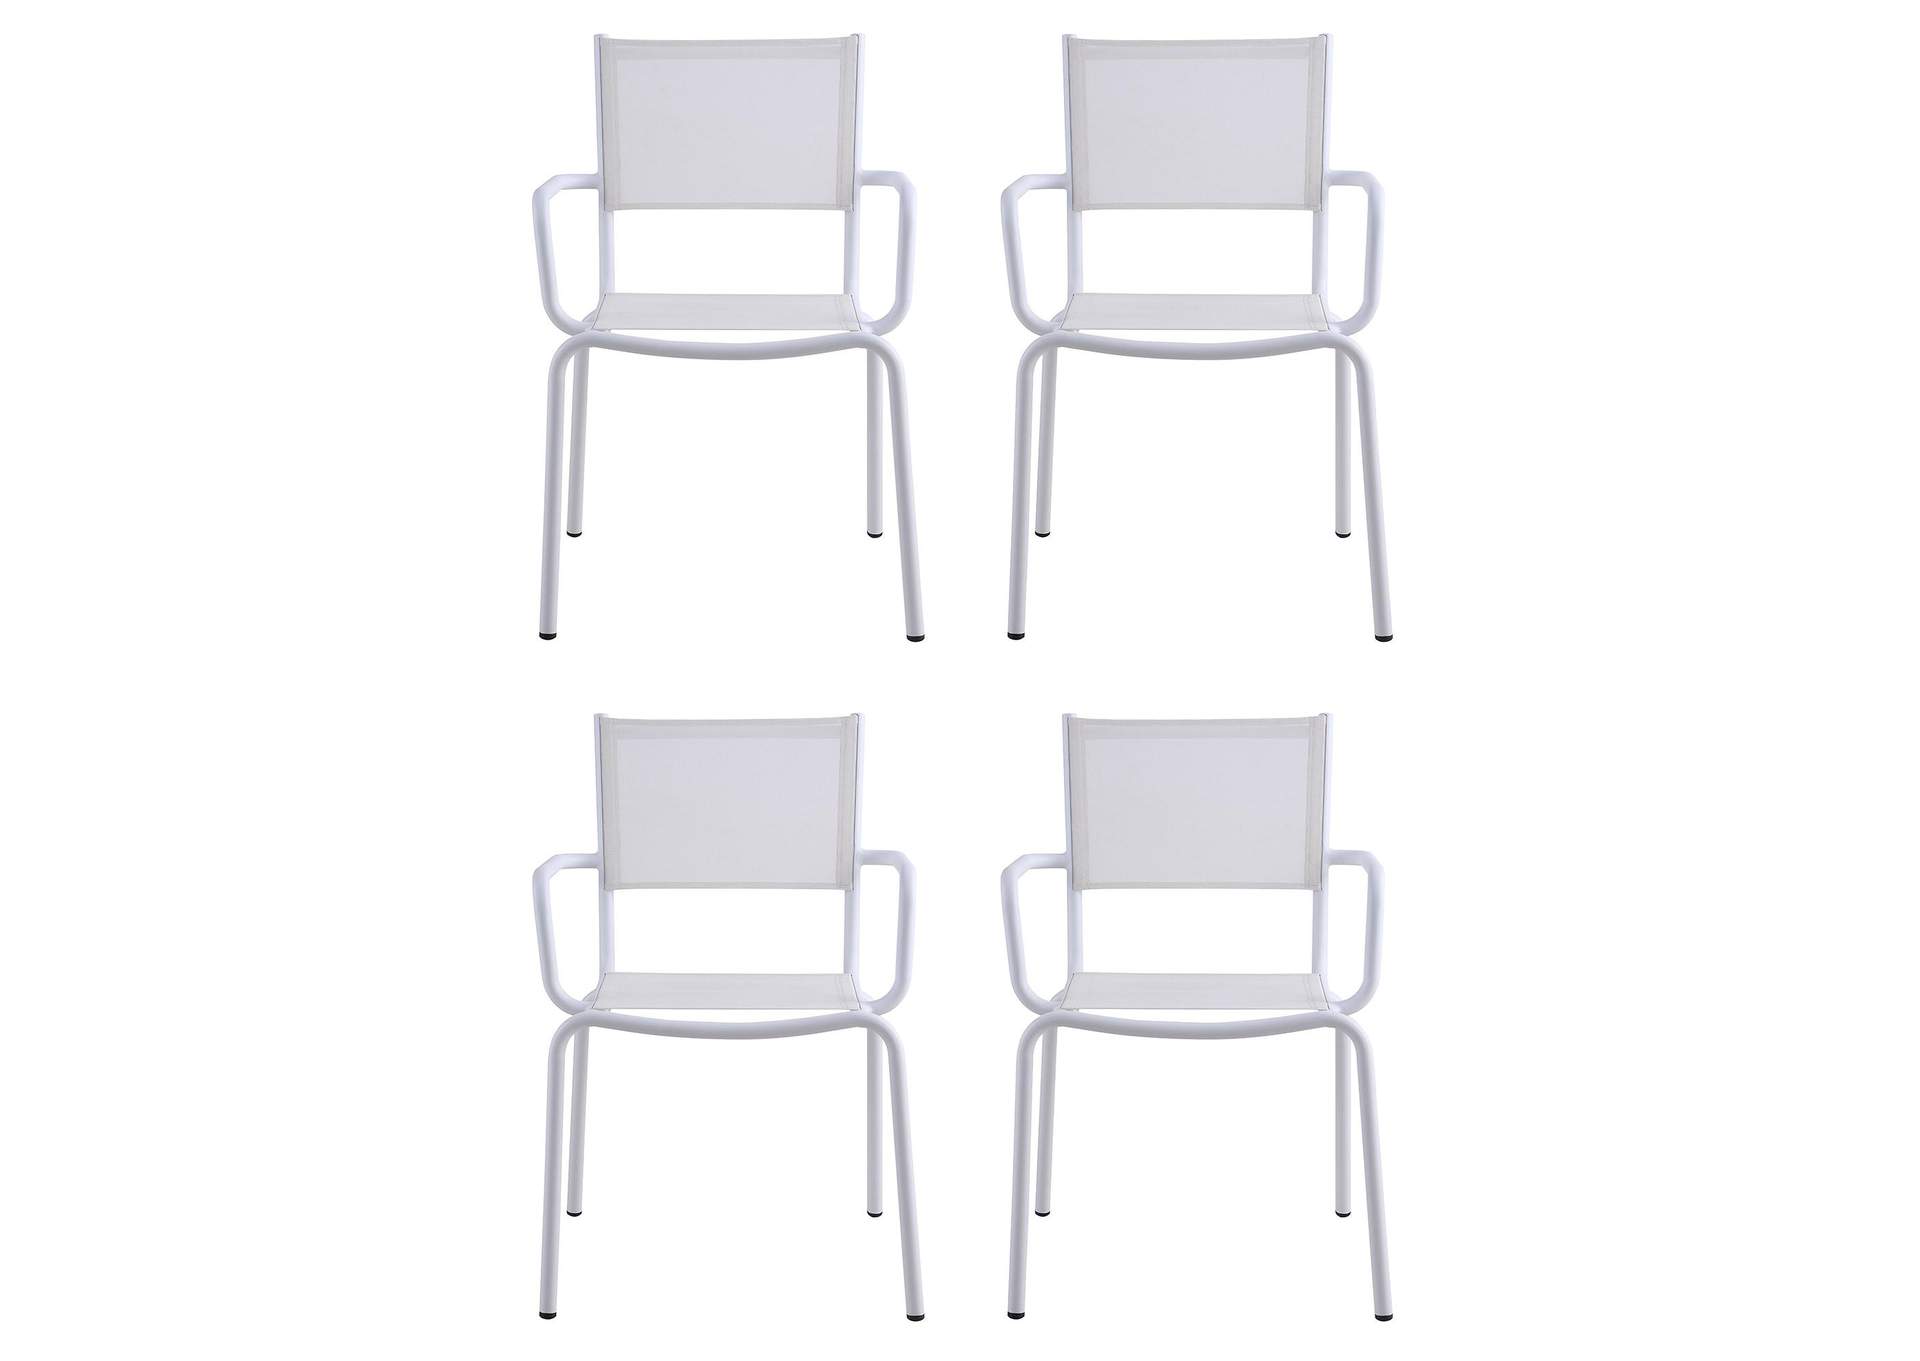 Outdoor Arm Chair w/ Aluminum Frame,Chintaly Imports